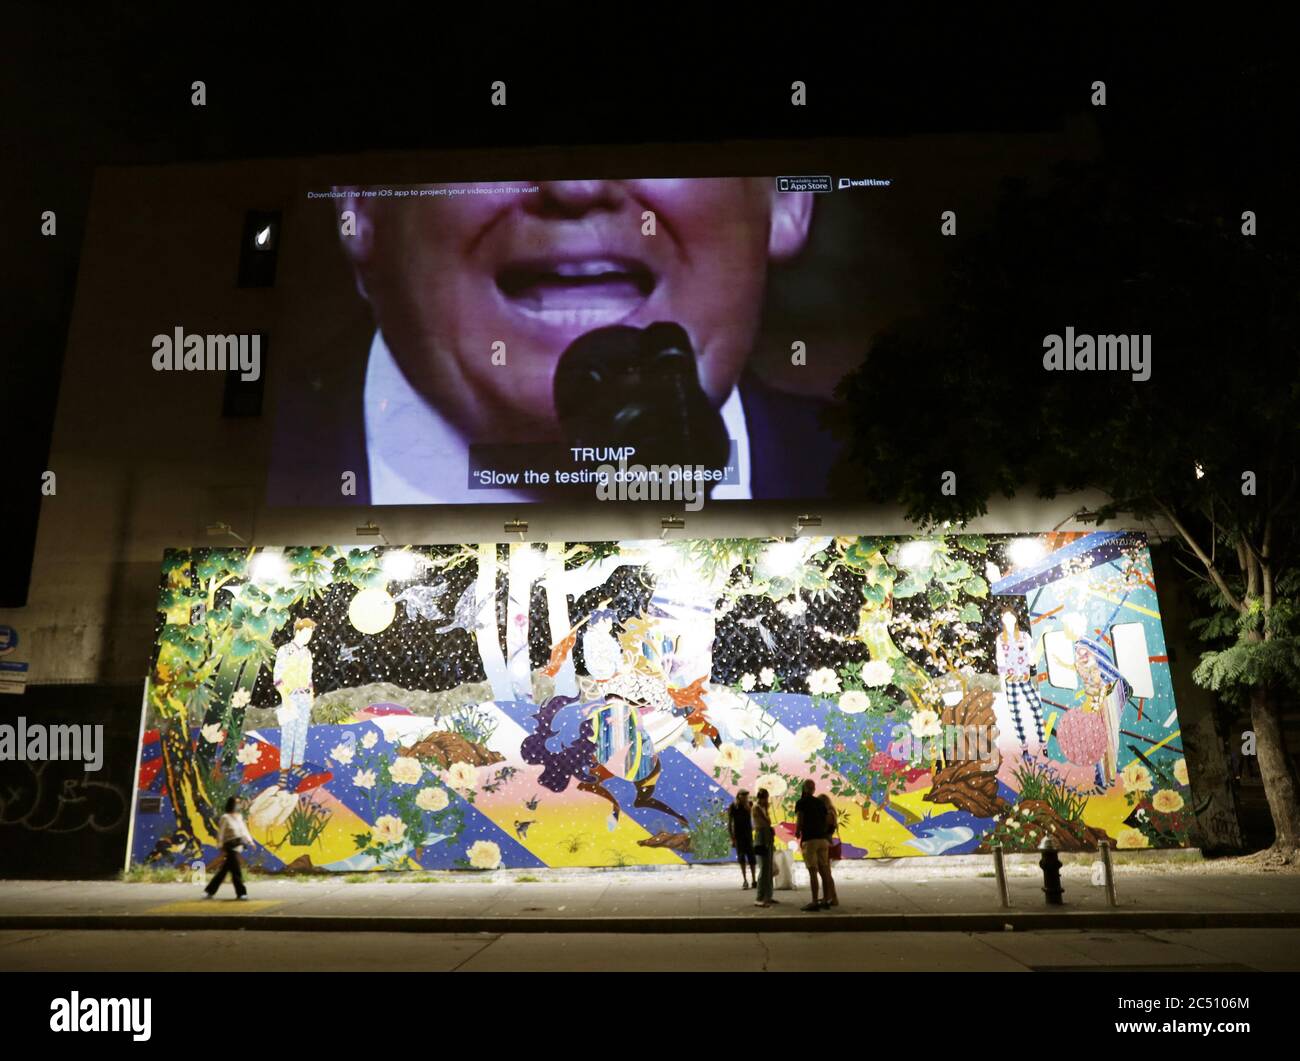 New York, United States. 30th June, 2020. An Anti-Trump ad related to the Coronavirus pandemic appears above the Bowery Mural on Bowery Street in New York City on Monday, June 29, 2020. Bowery Mural is an expansive outdoor wall showcasing creative, contemporary murals that change regularly. Photo by John Angelillo/UPI Credit: UPI/Alamy Live News Stock Photo